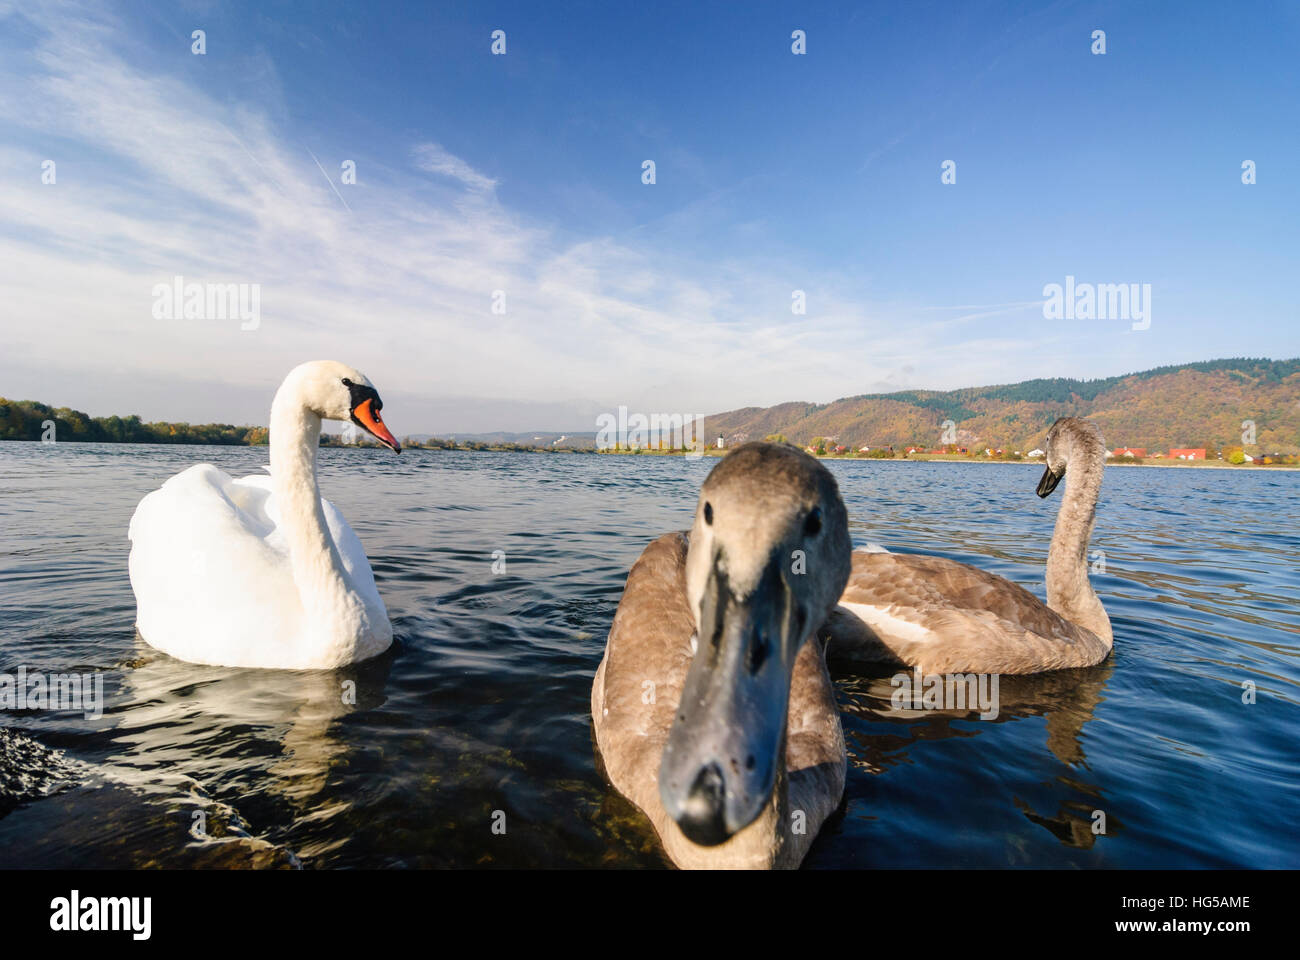 Barbing: mute swan (Cygnus olor) with young animals on the Danube, Oberpfalz, Upper Palatinate, Bayern, Bavaria, Germany Stock Photo